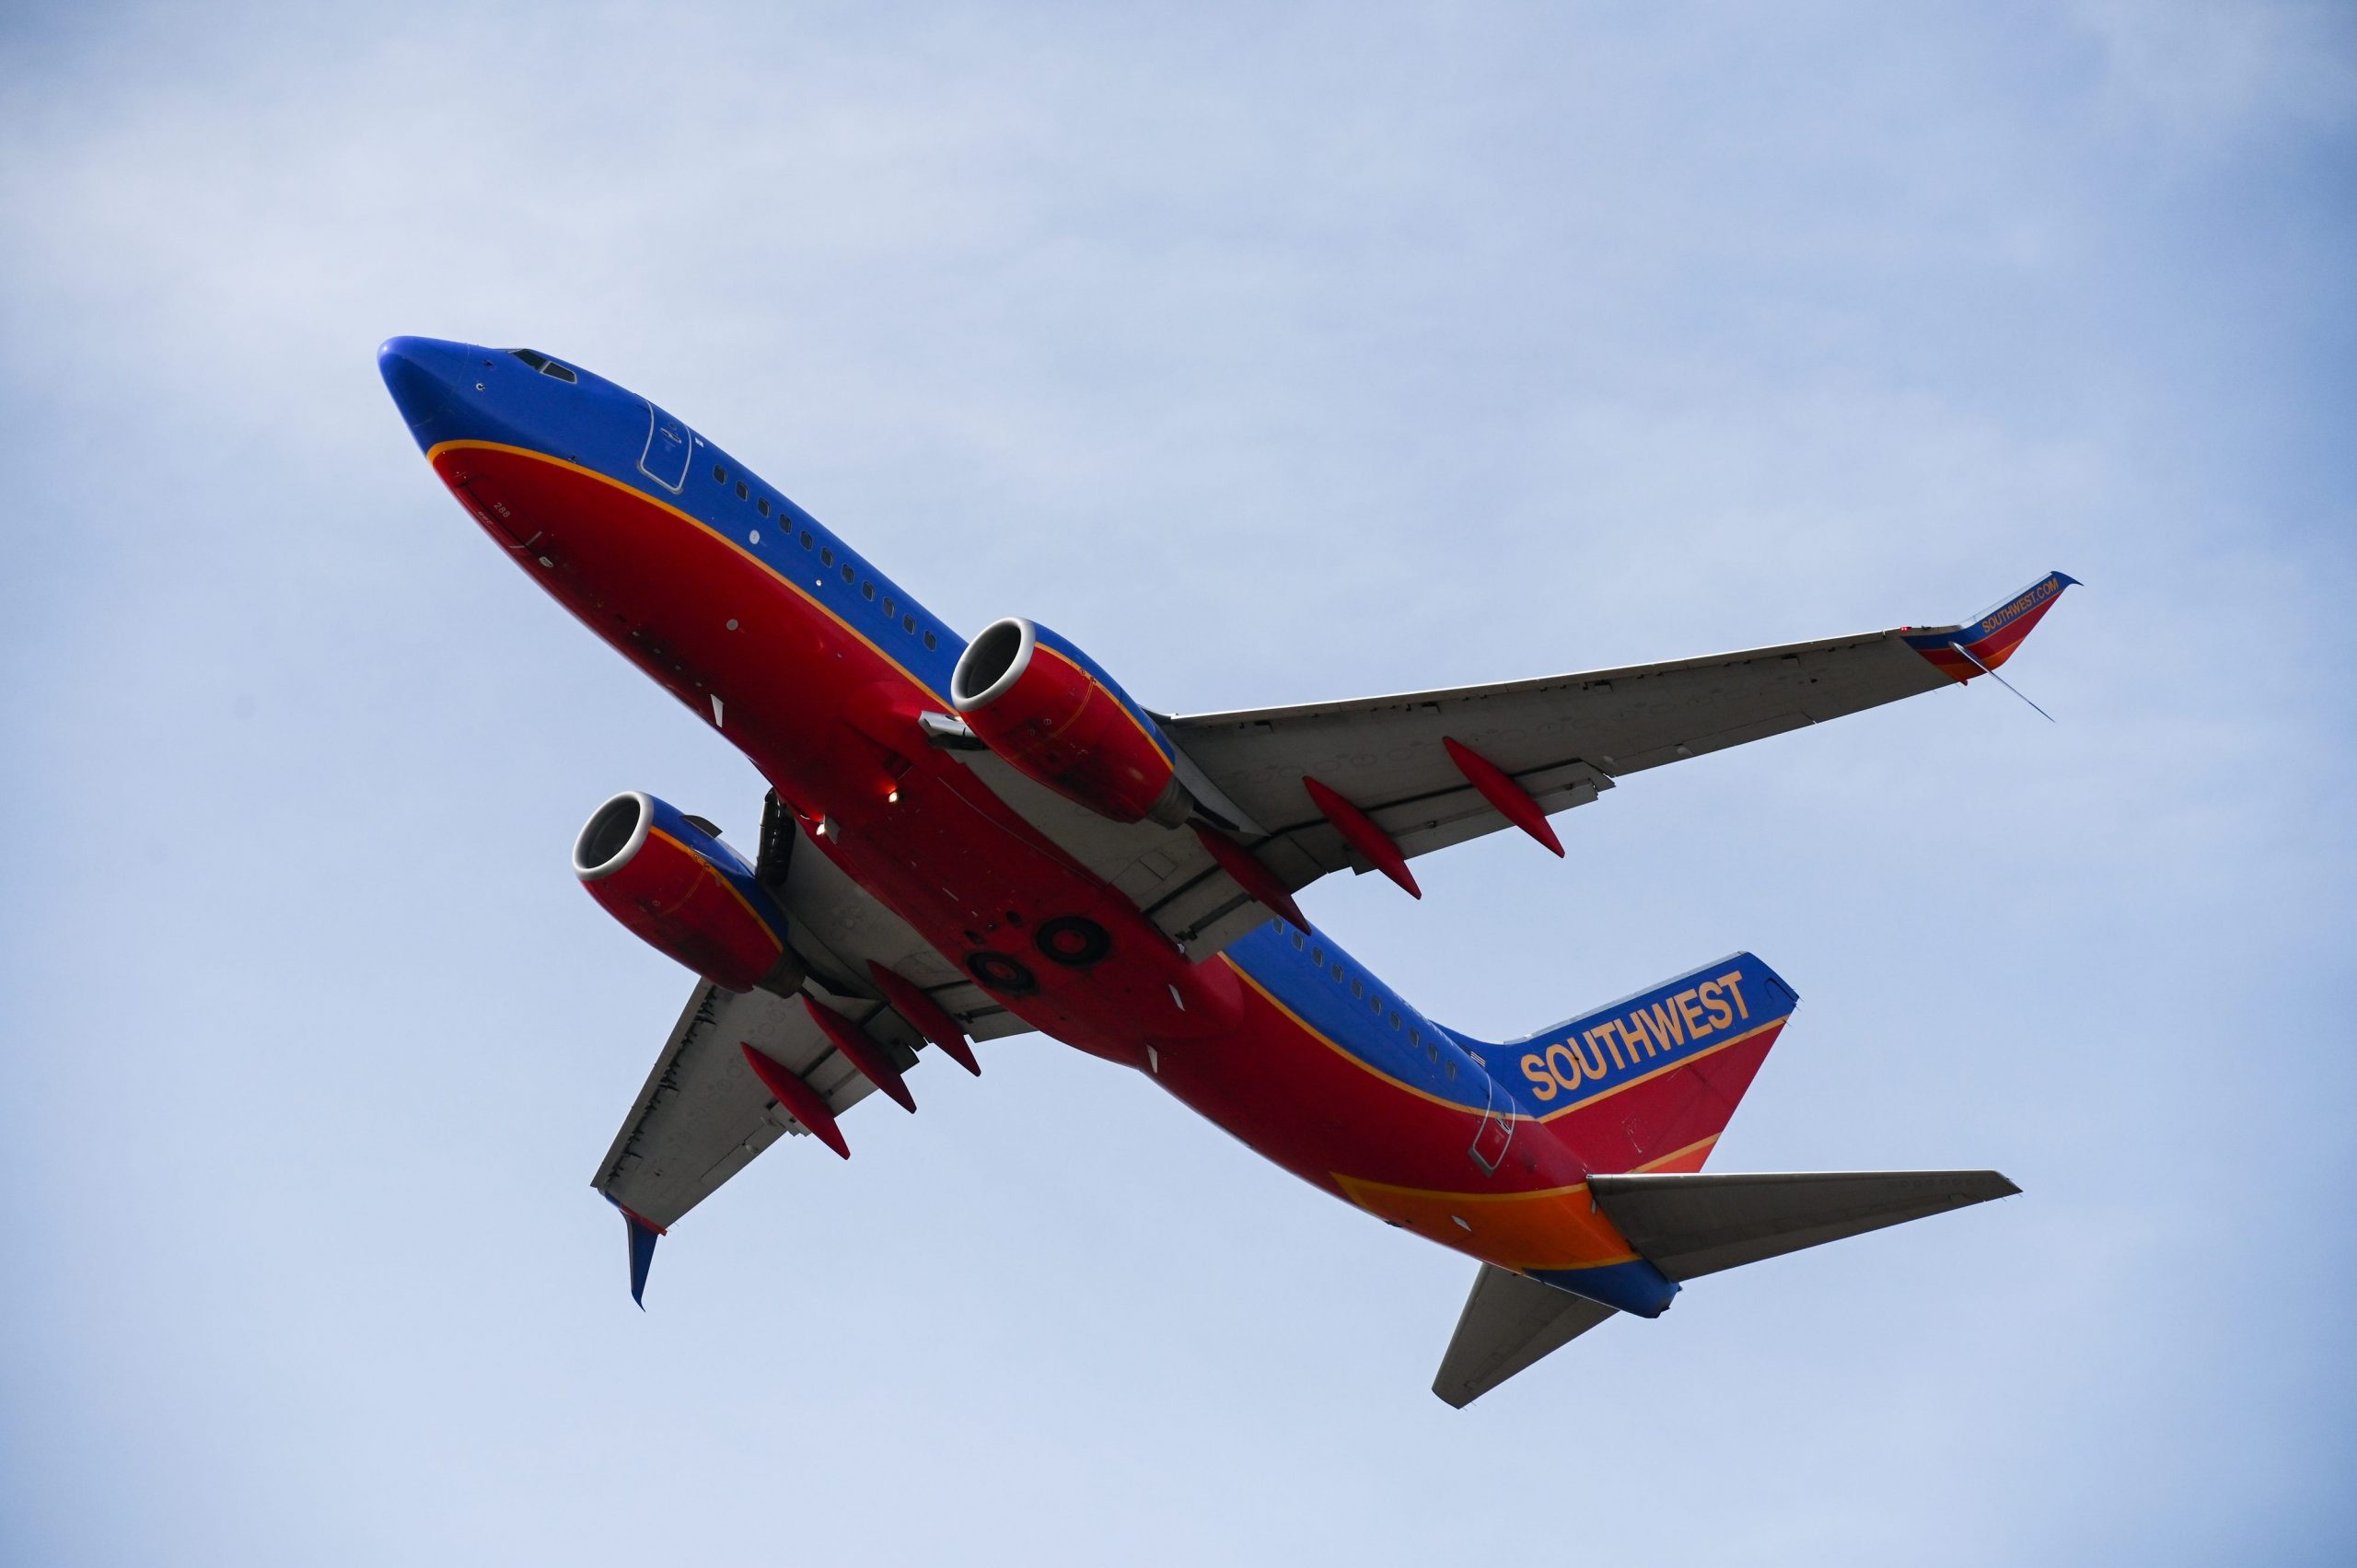 A Southwest Airlines airplane takes off in front of a blue sky